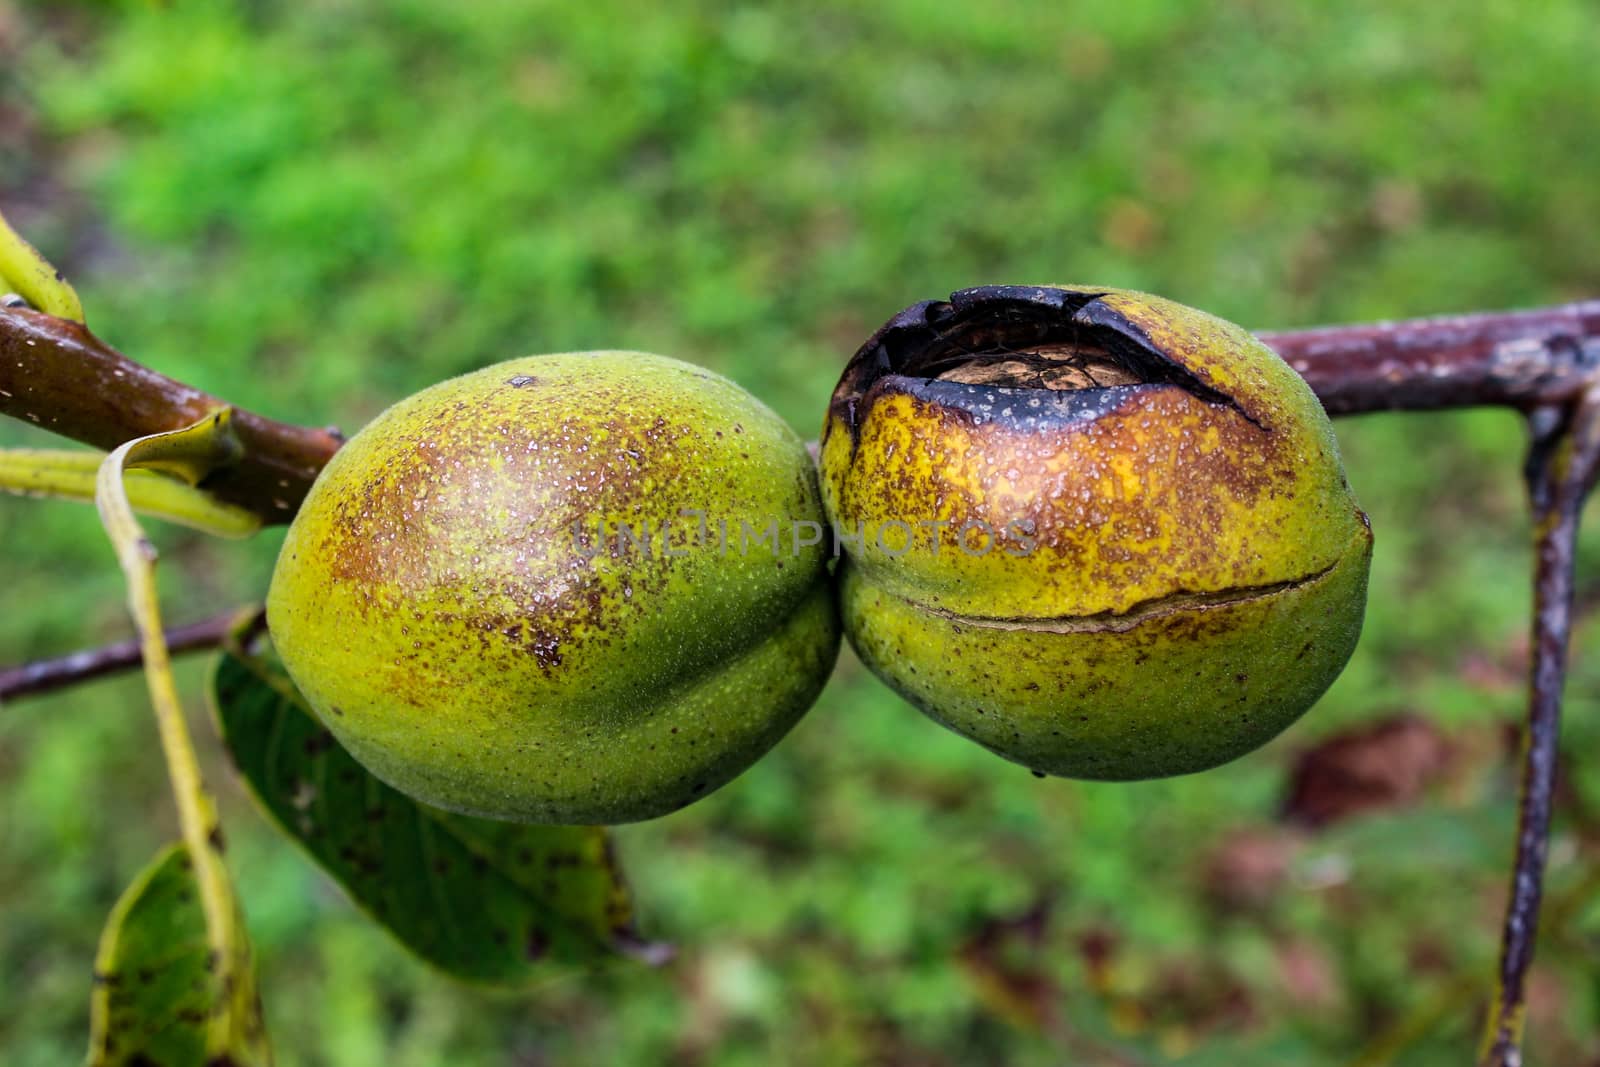 Two walnuts in green shells burned by the sun. by mahirrov